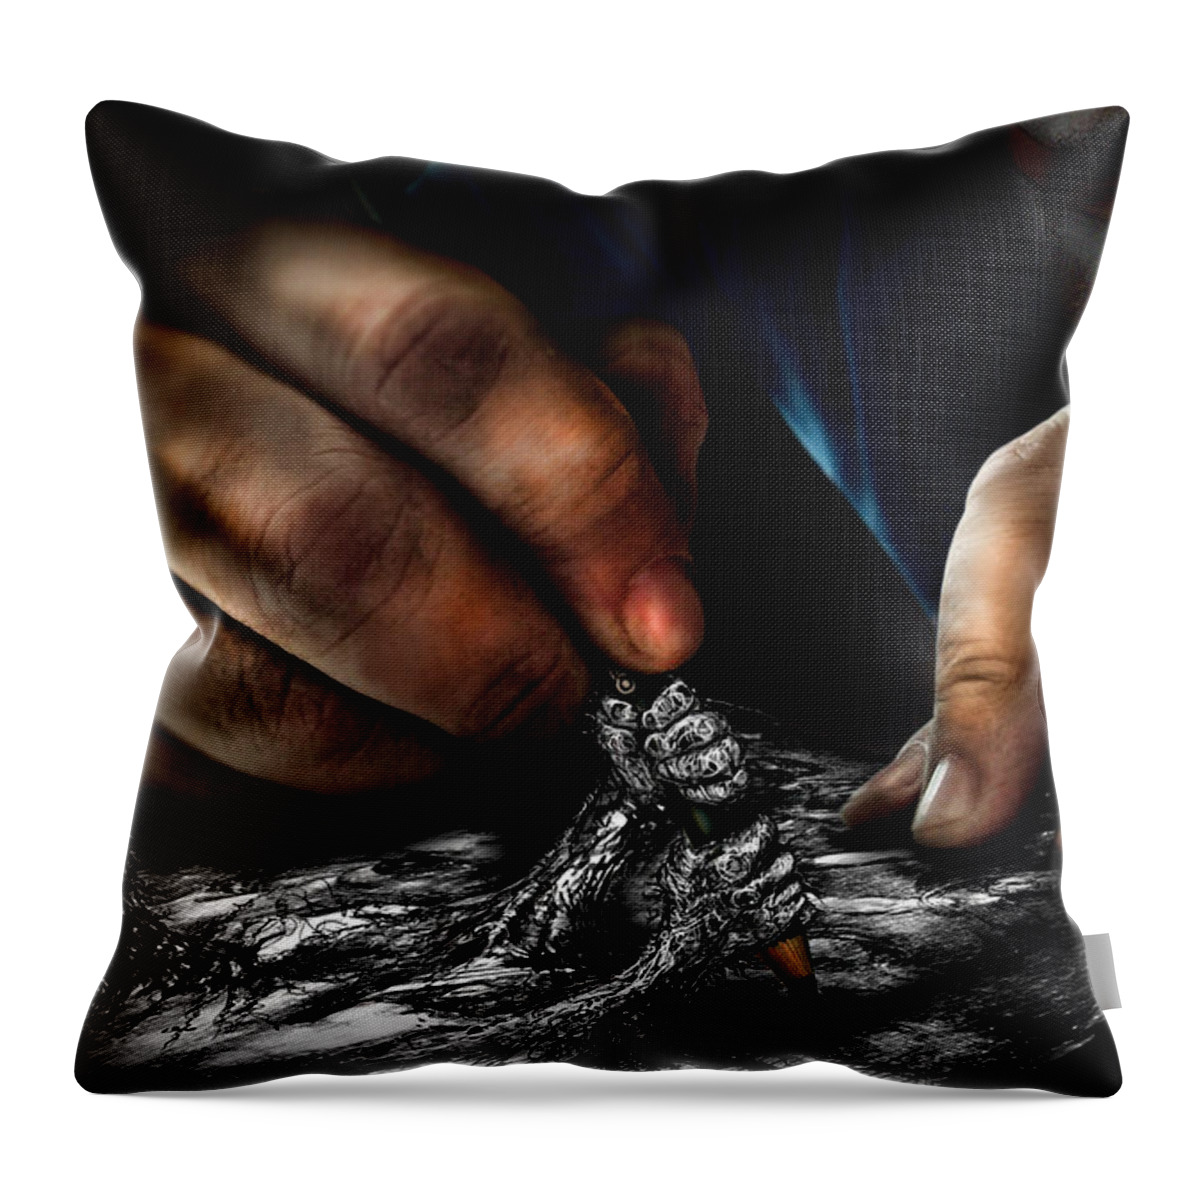 Hands Throw Pillow featuring the digital art Unfinished by Alessandro Della Pietra